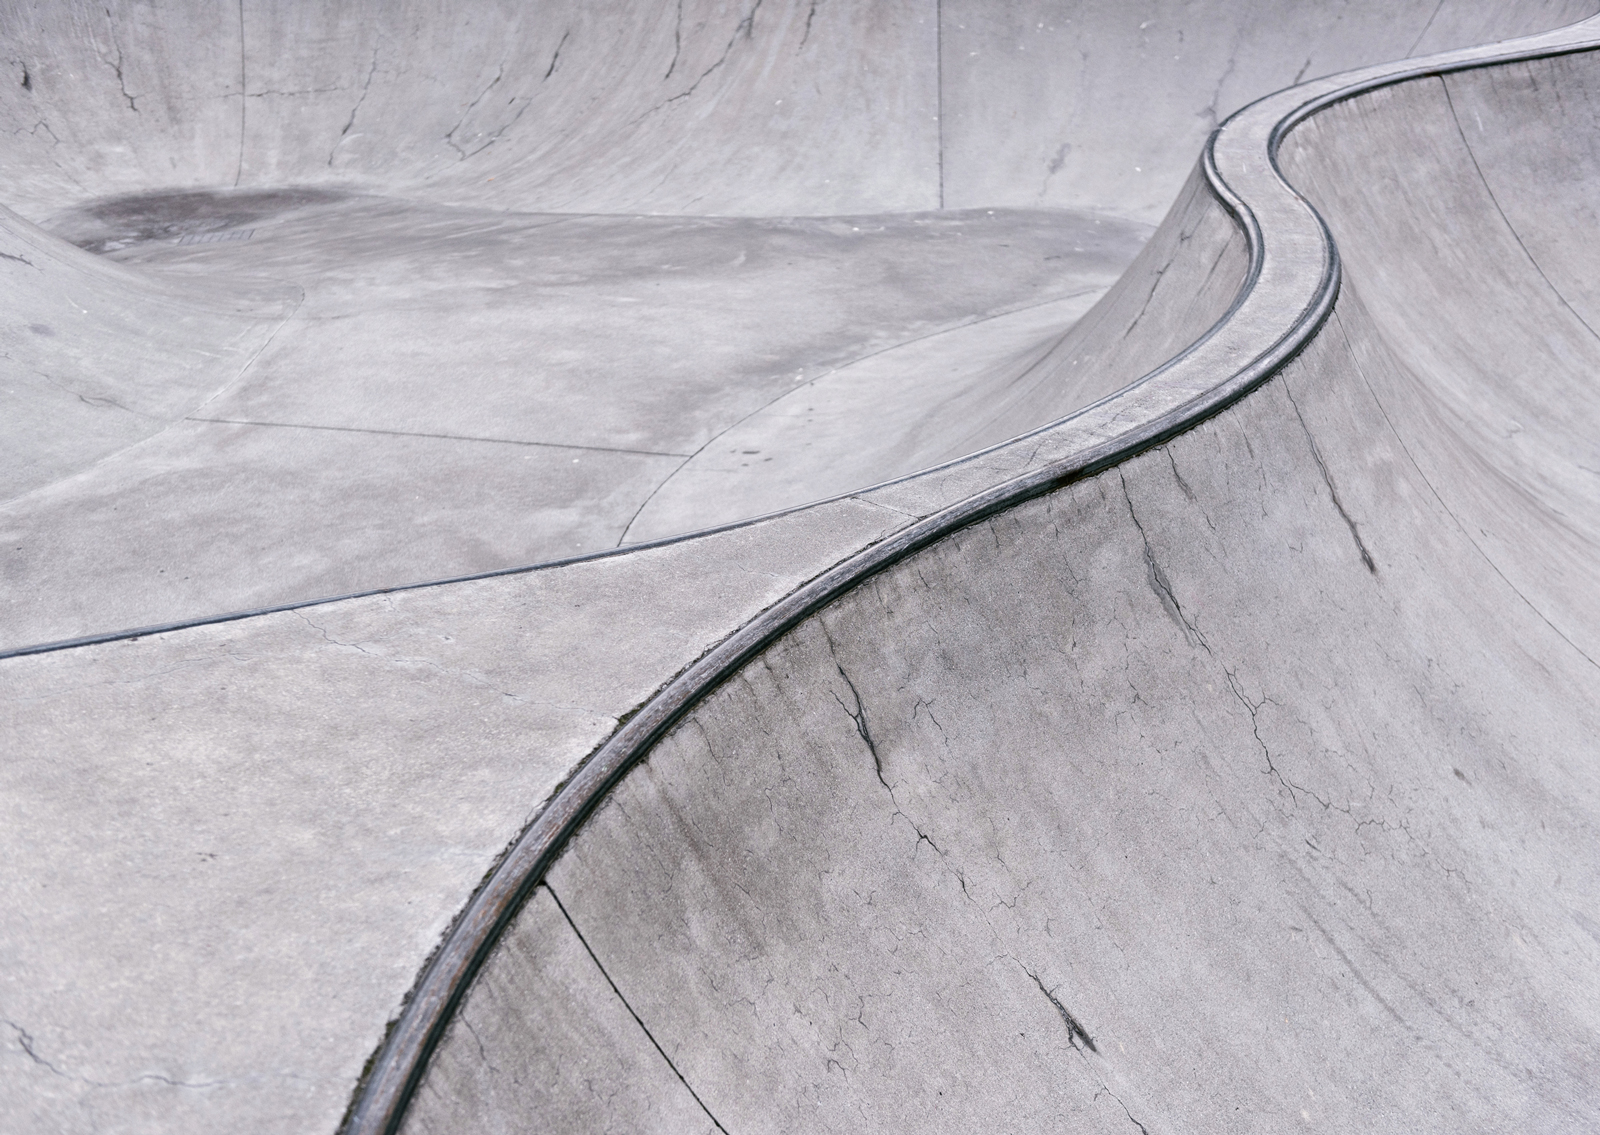 Keith and Sandy branding – dramatic view of skate park